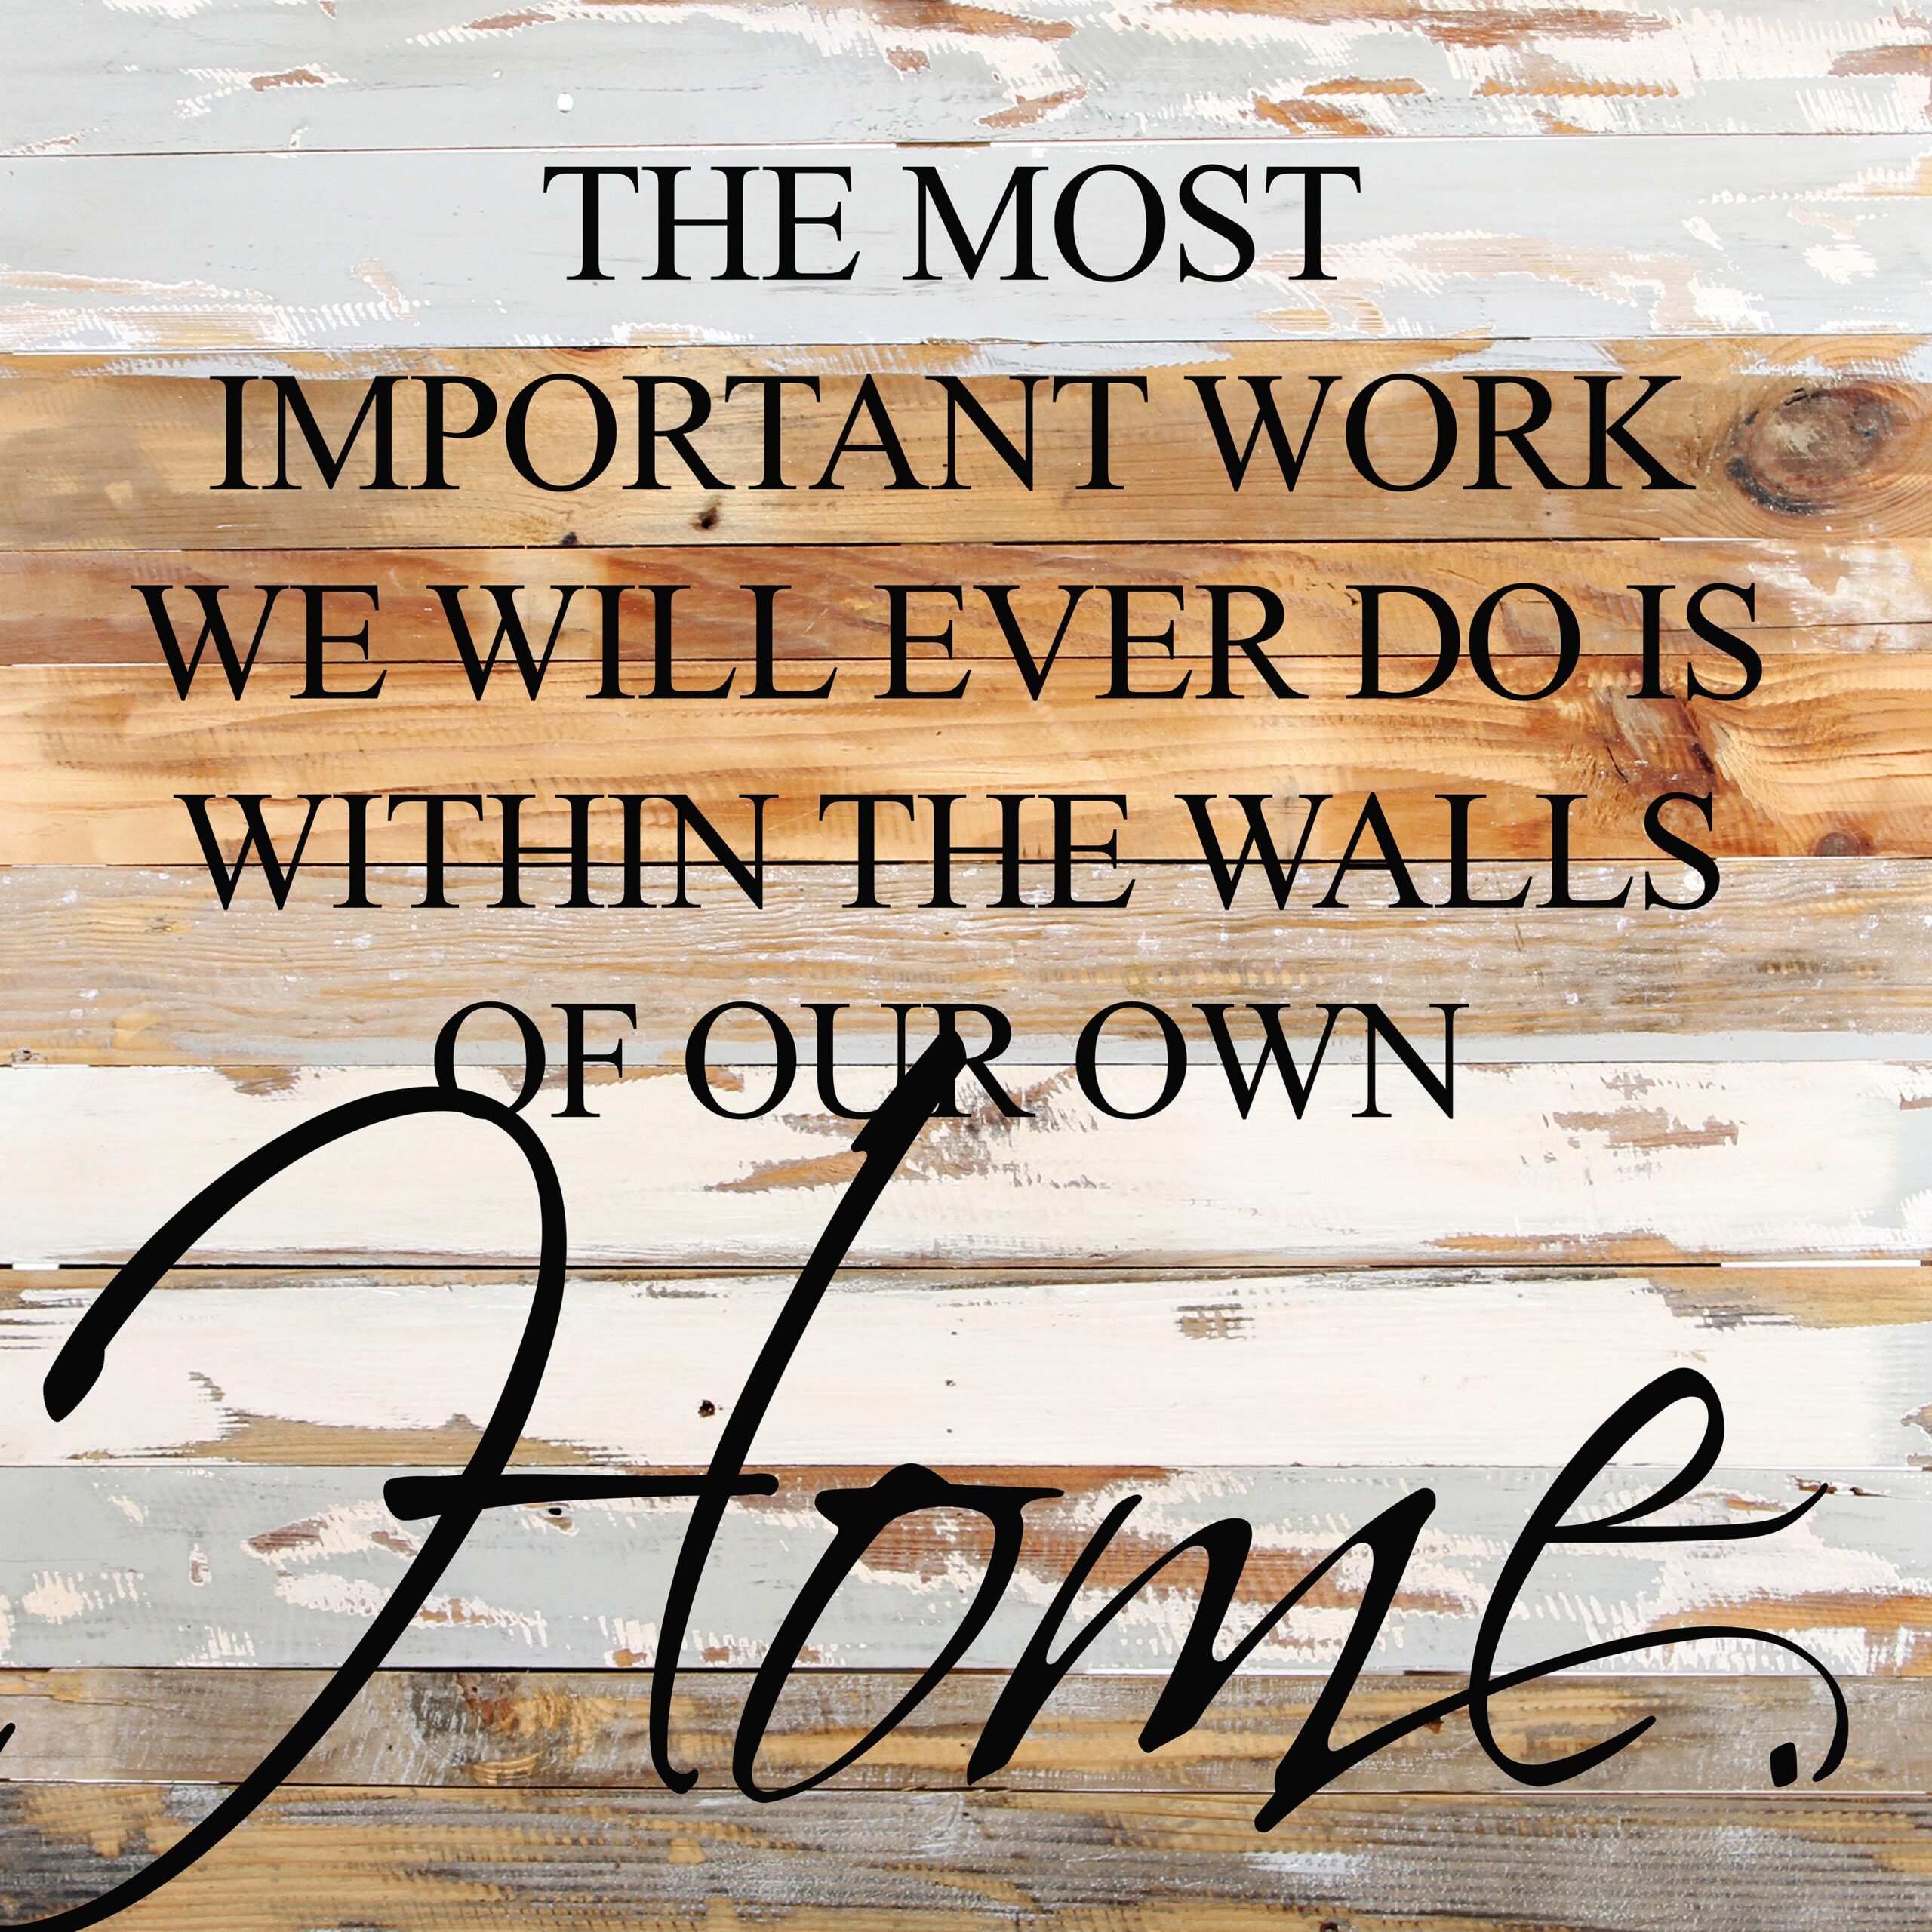 The most important work we will ever do is within the walls of our own home. / 24x24 Reclaimed Wood Wall Art